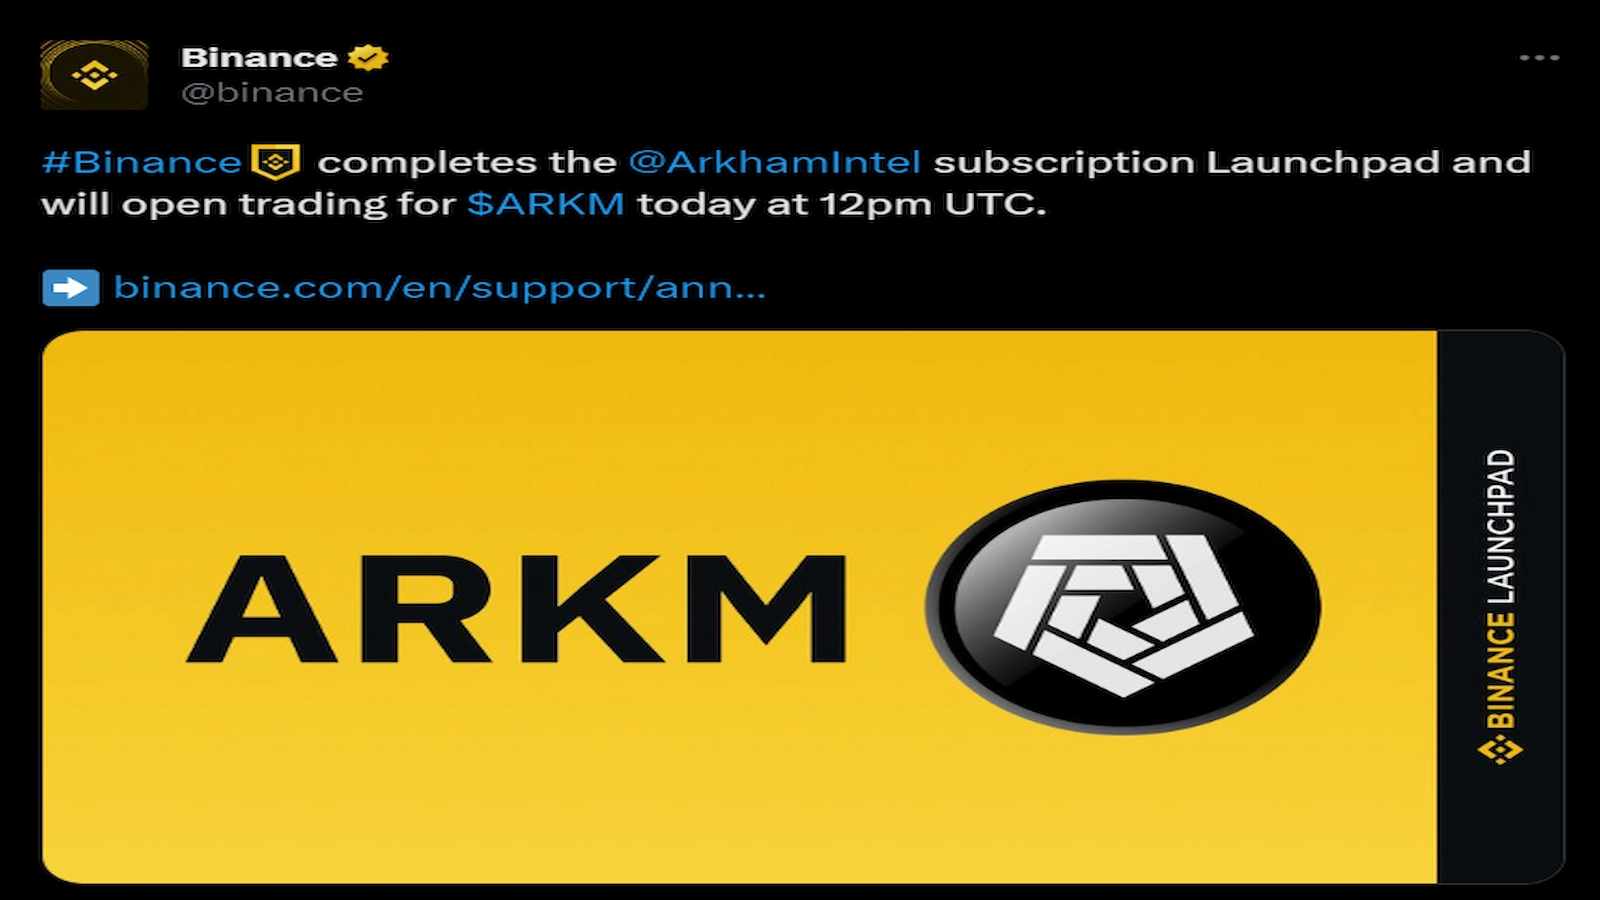 Binance announced the listing of ARKM token on its launchpad